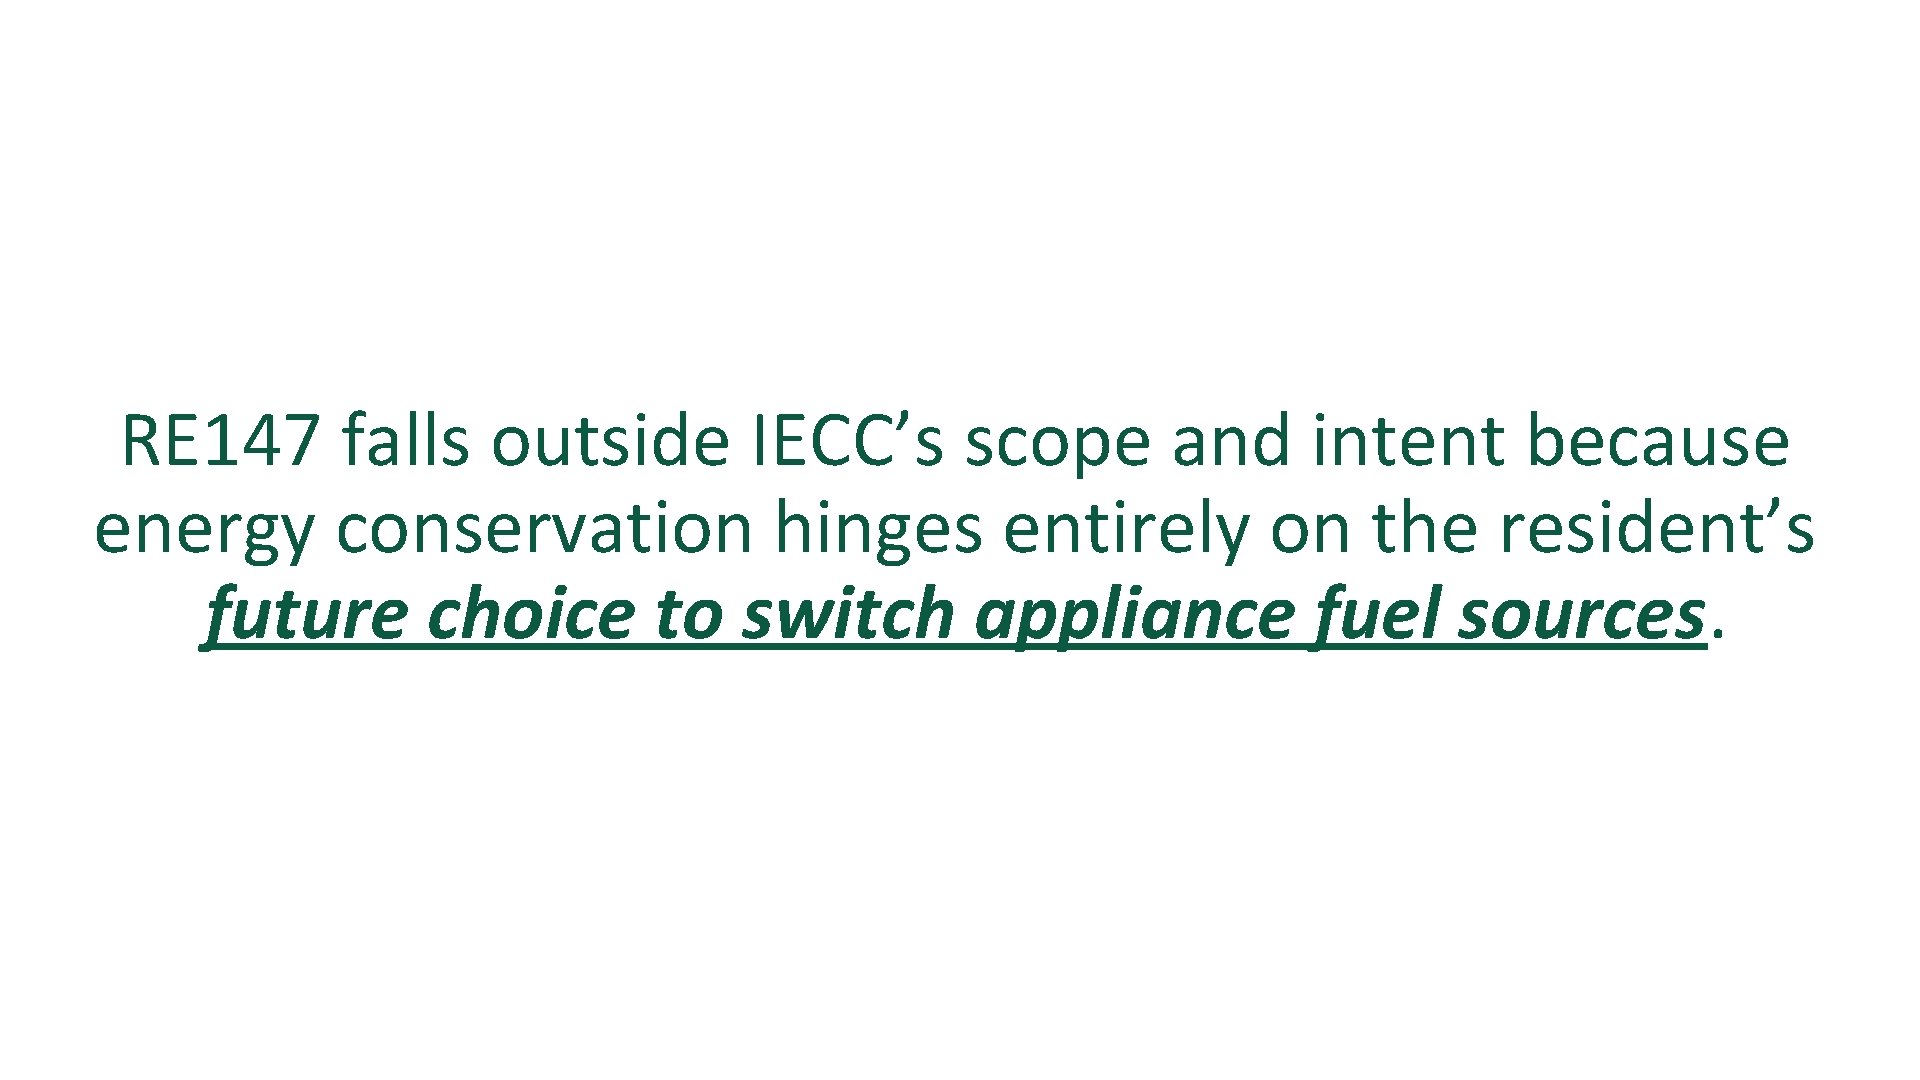 RE 147 falls outside IECC’s scope and intent because energy conservation hinges entirely on